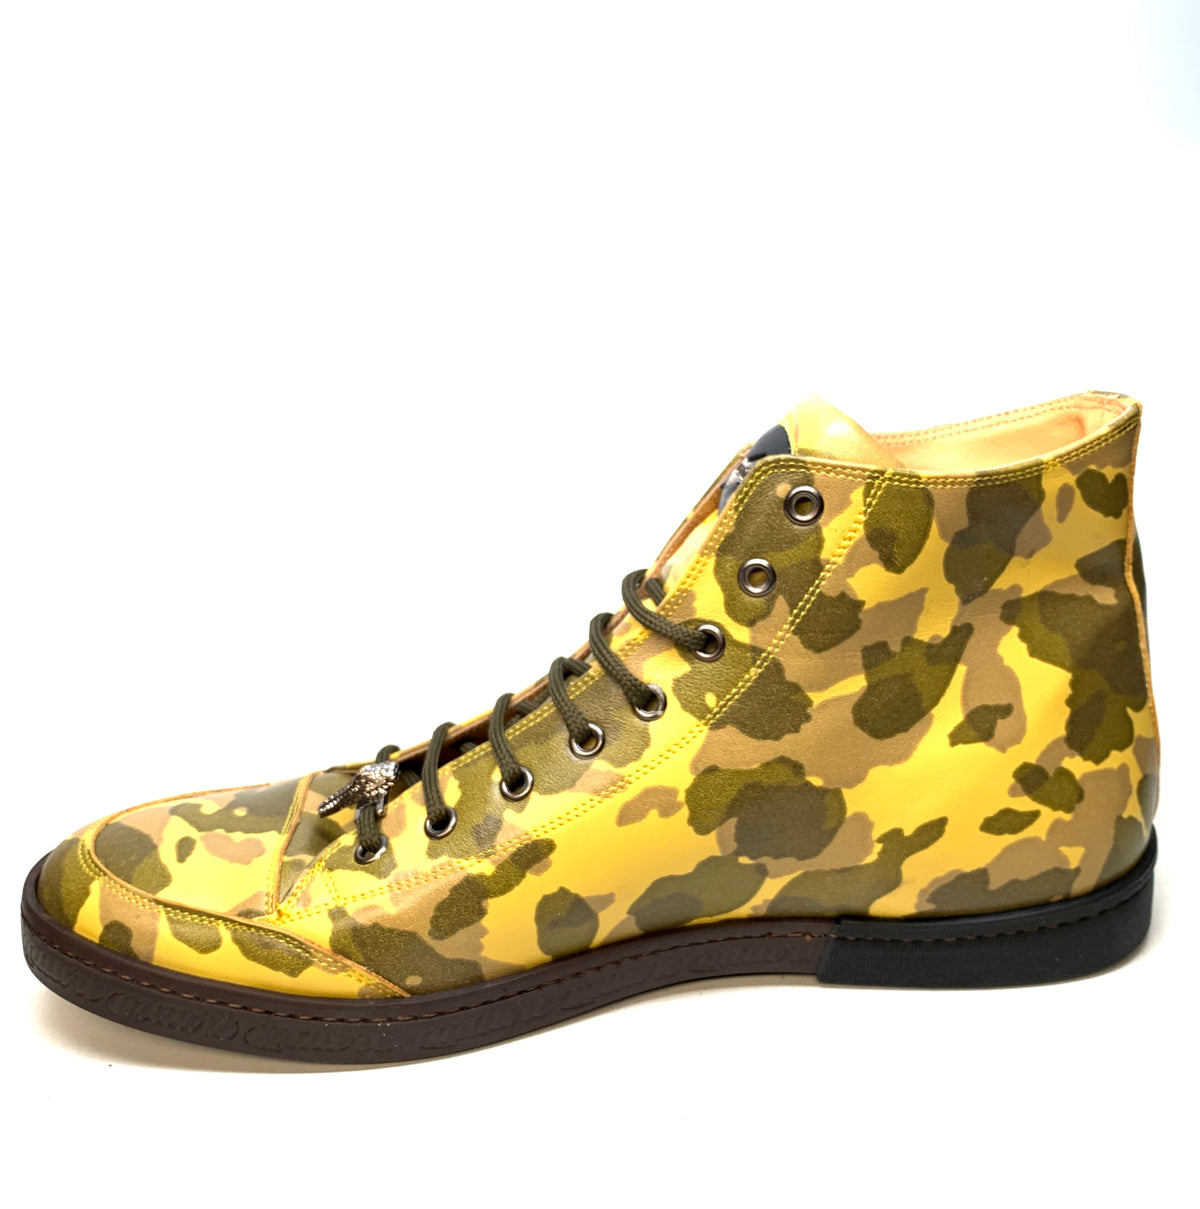 Mauri ‘8888’ Camouflage Leather High-Top Sneakers - Dudes Boutique